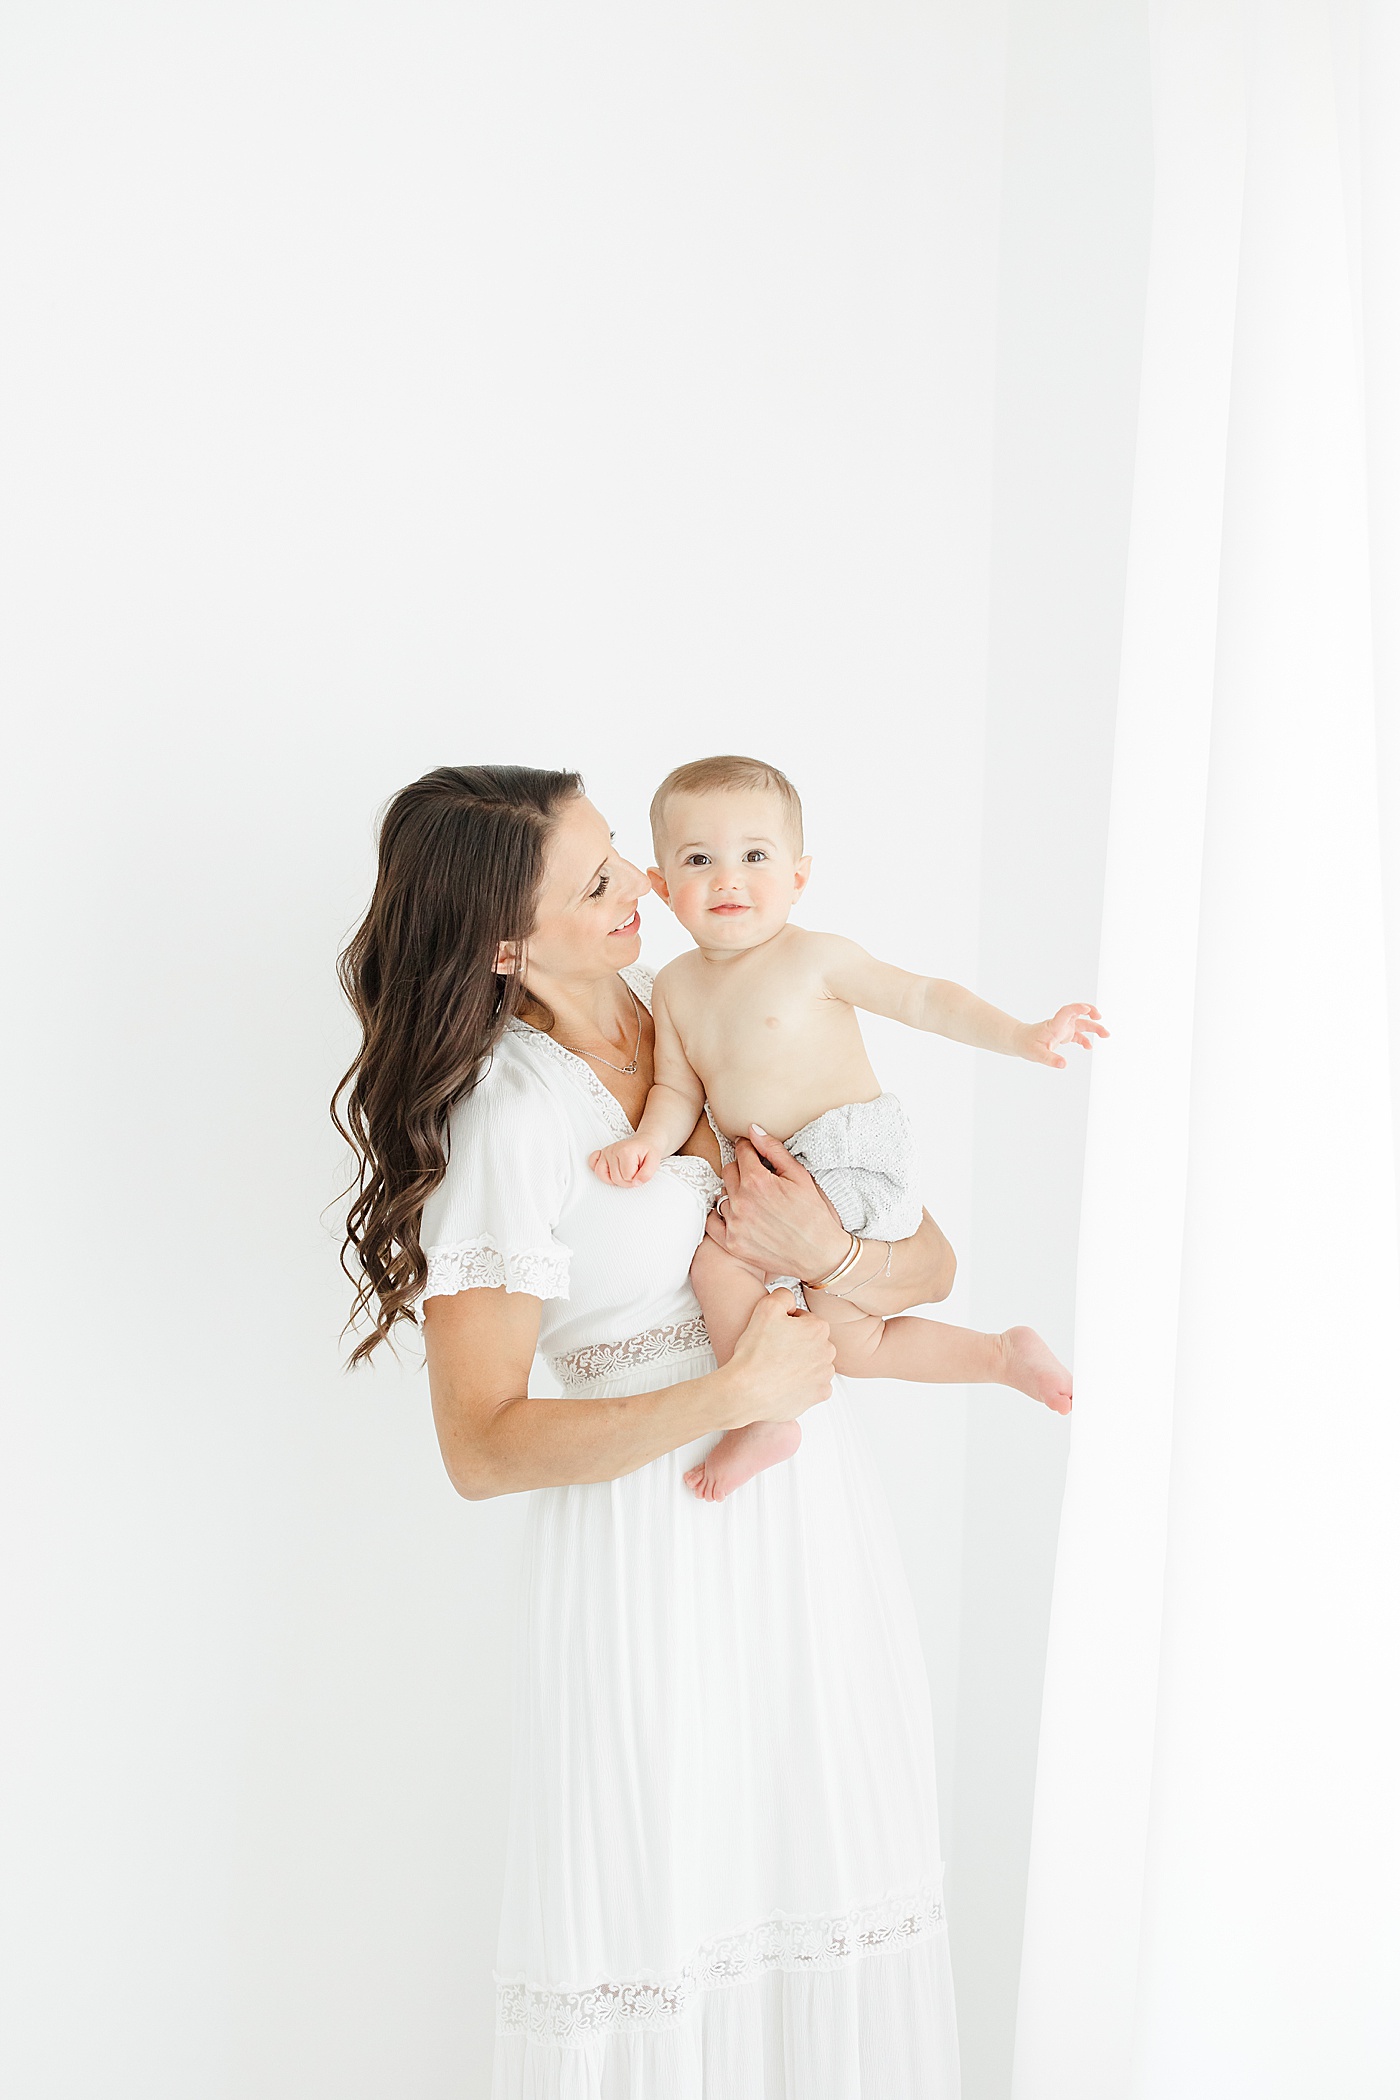 Mom holding one year old son during his first birthday photoshoot with Kristin Wood Photography.